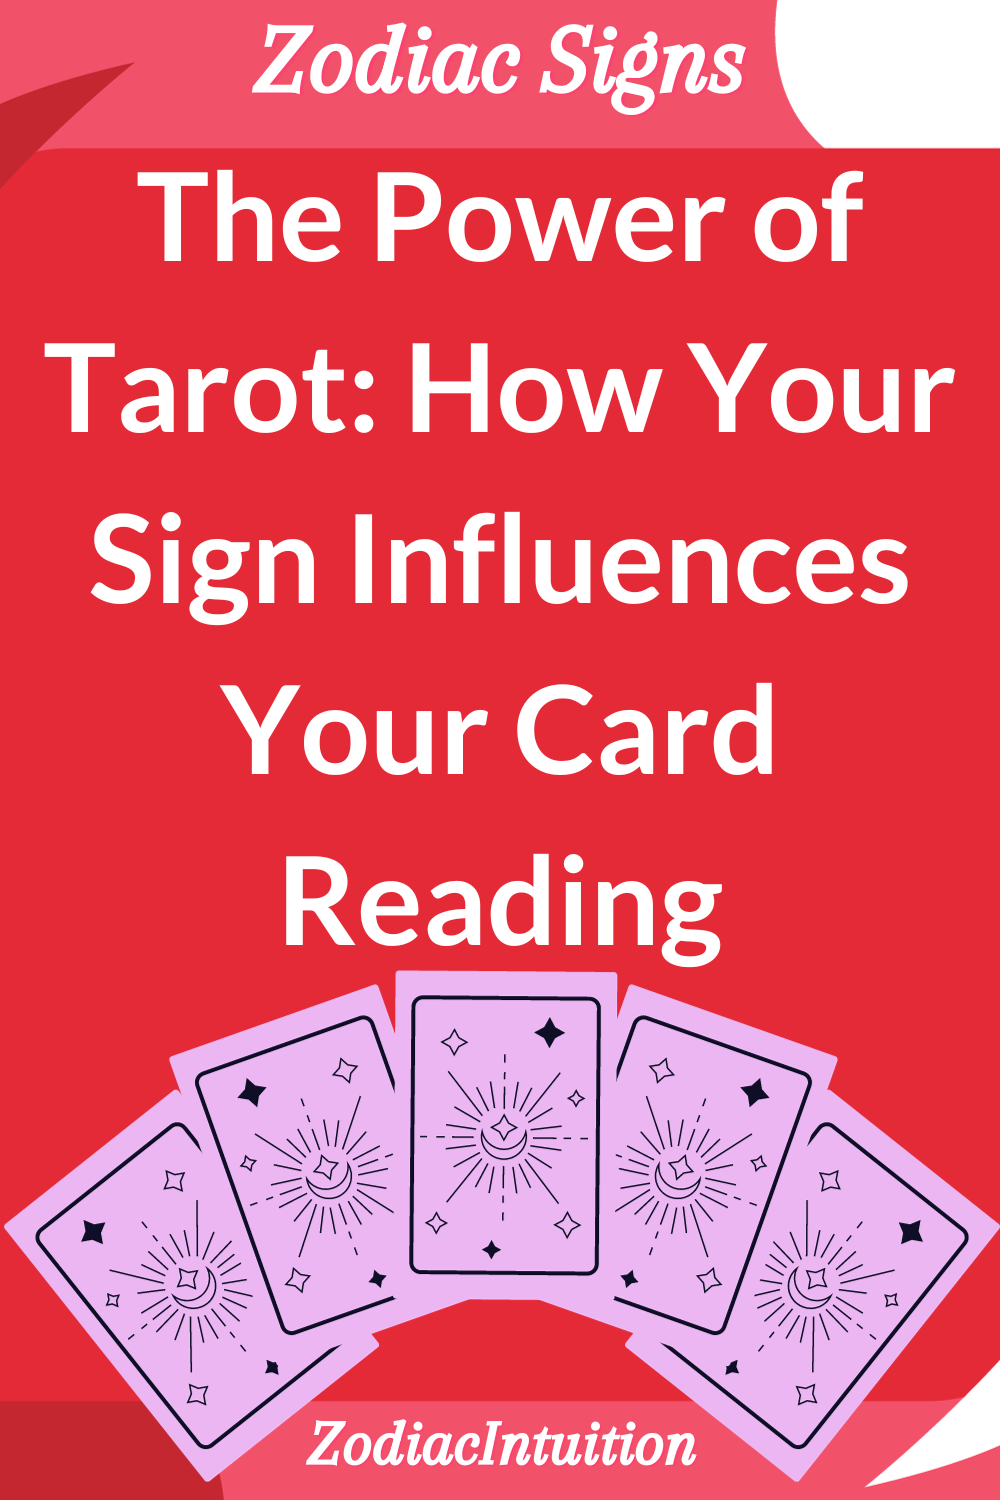 The Power of Tarot: How Your Sign Influences Your Card Reading